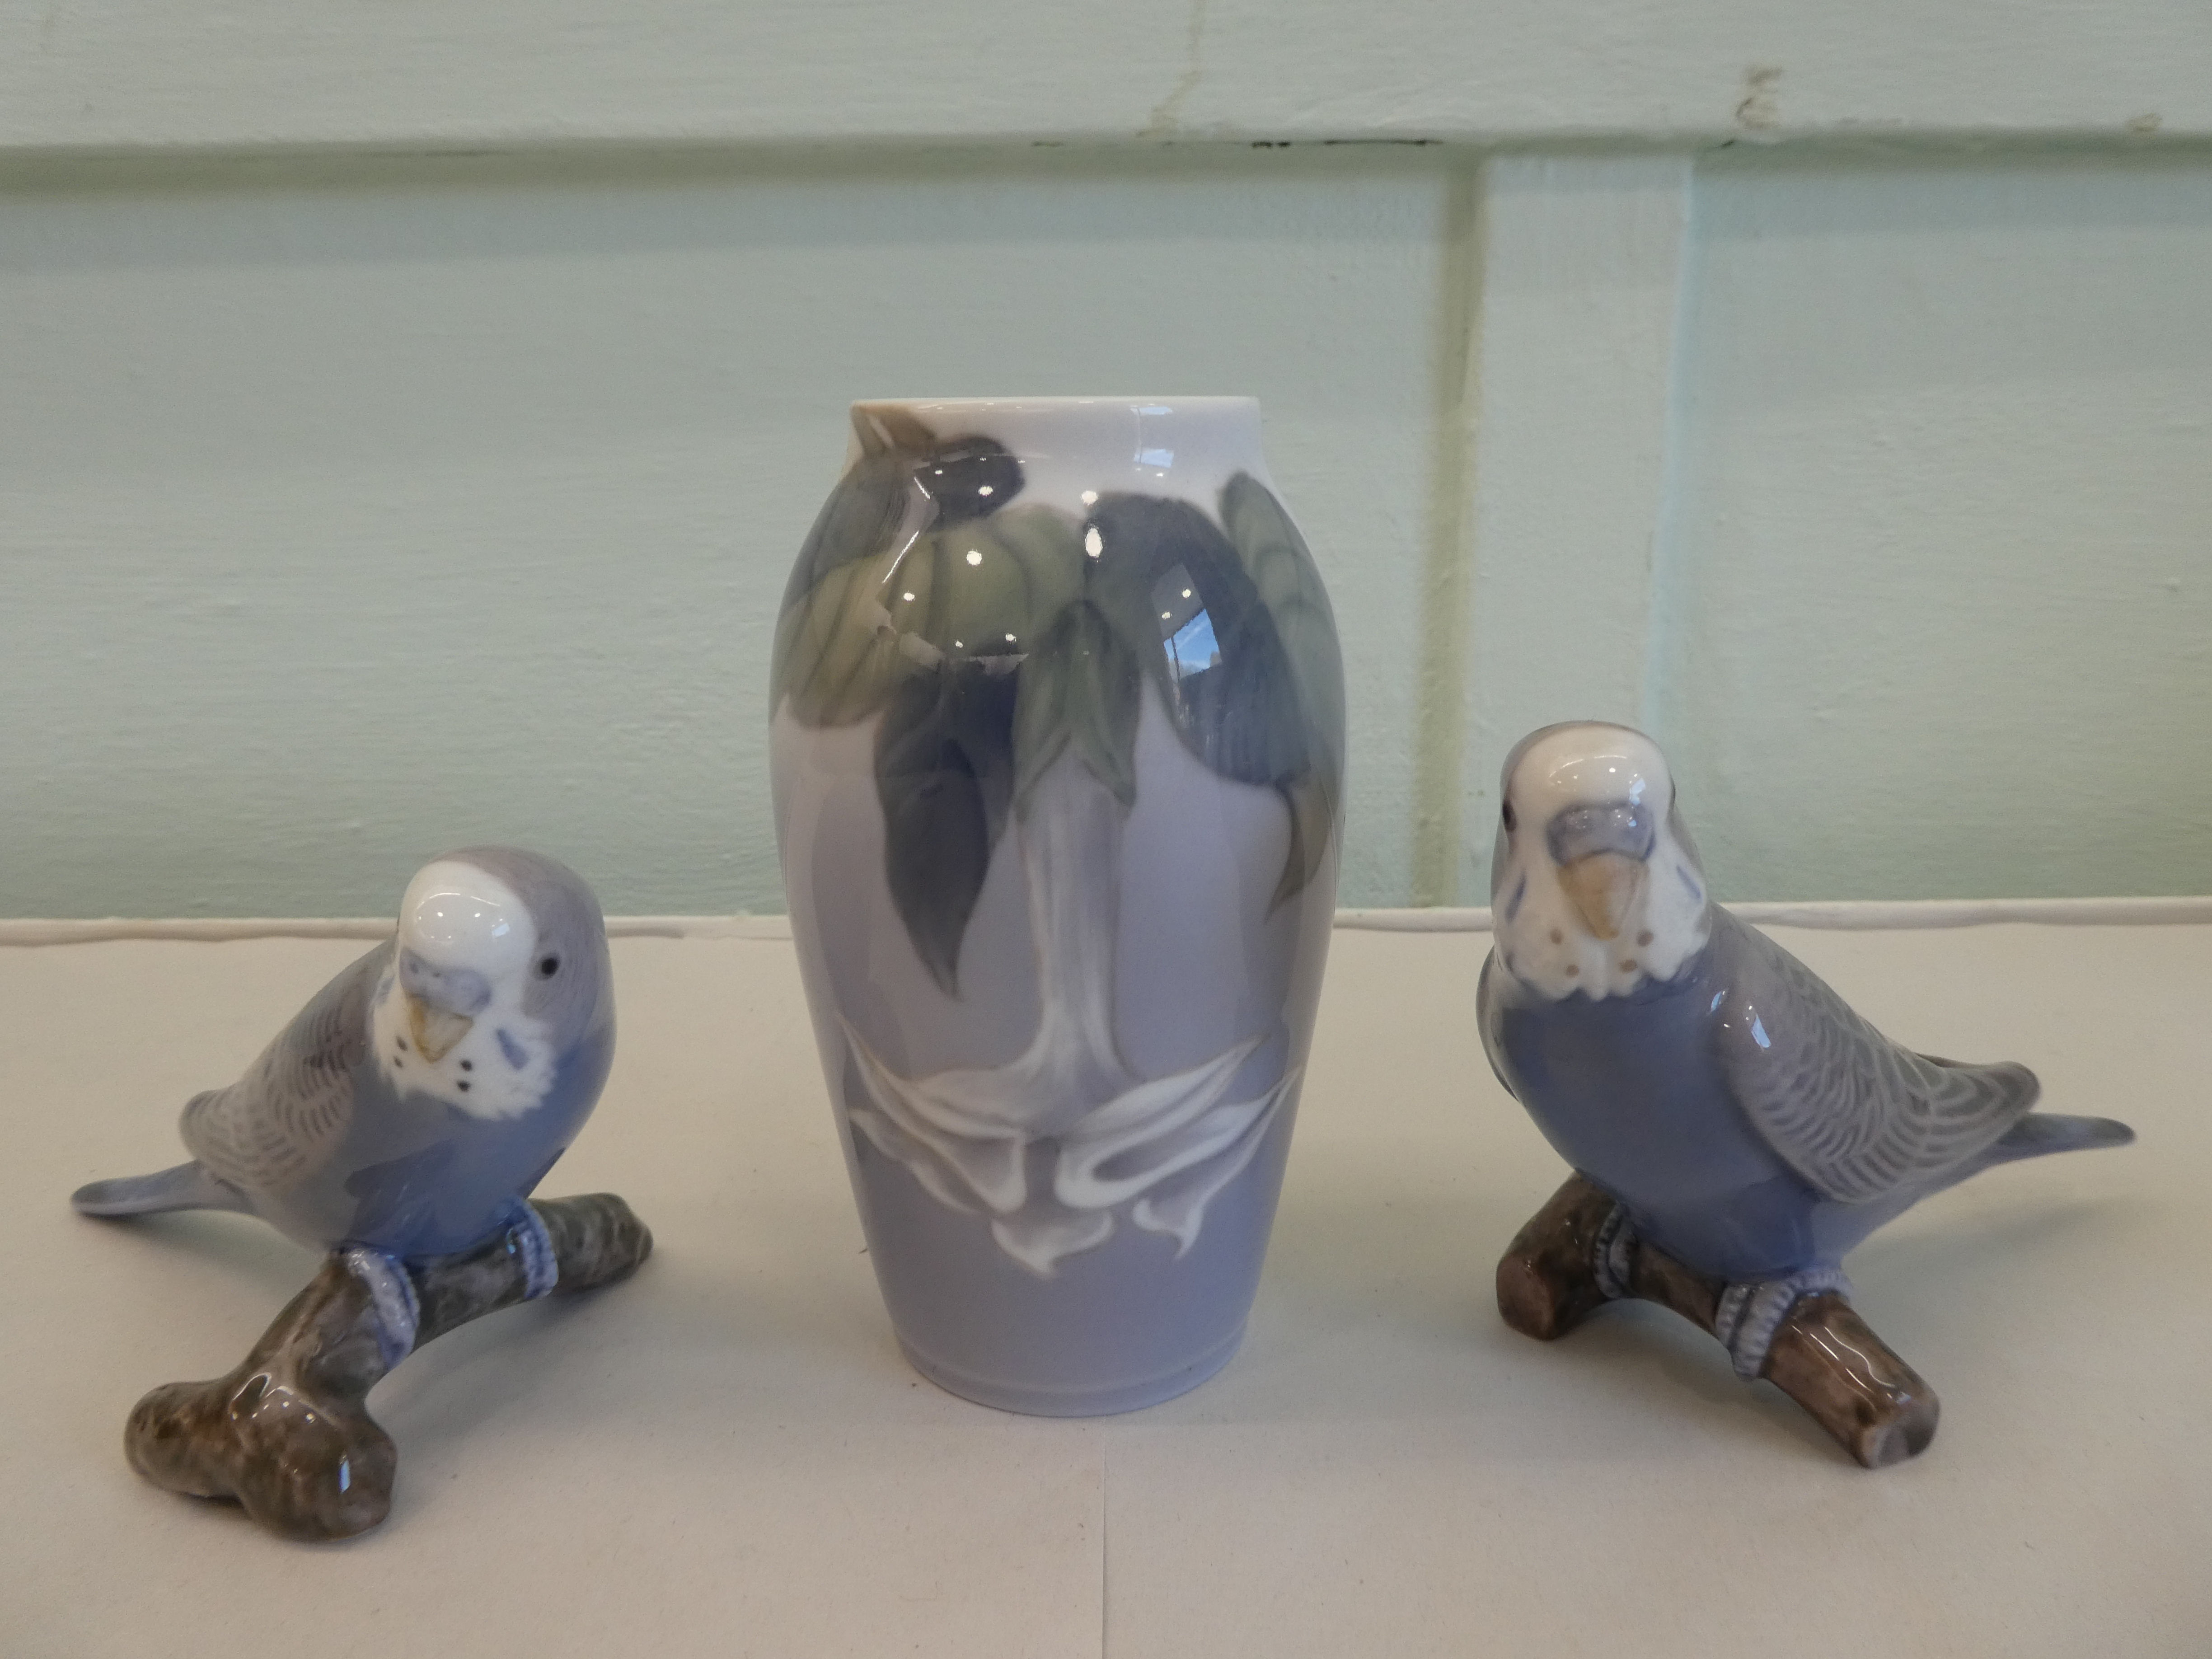 Royal Copenhagen and B&G porcelain collectables: to include two juvenile figures  6" & 7"h - Image 6 of 11